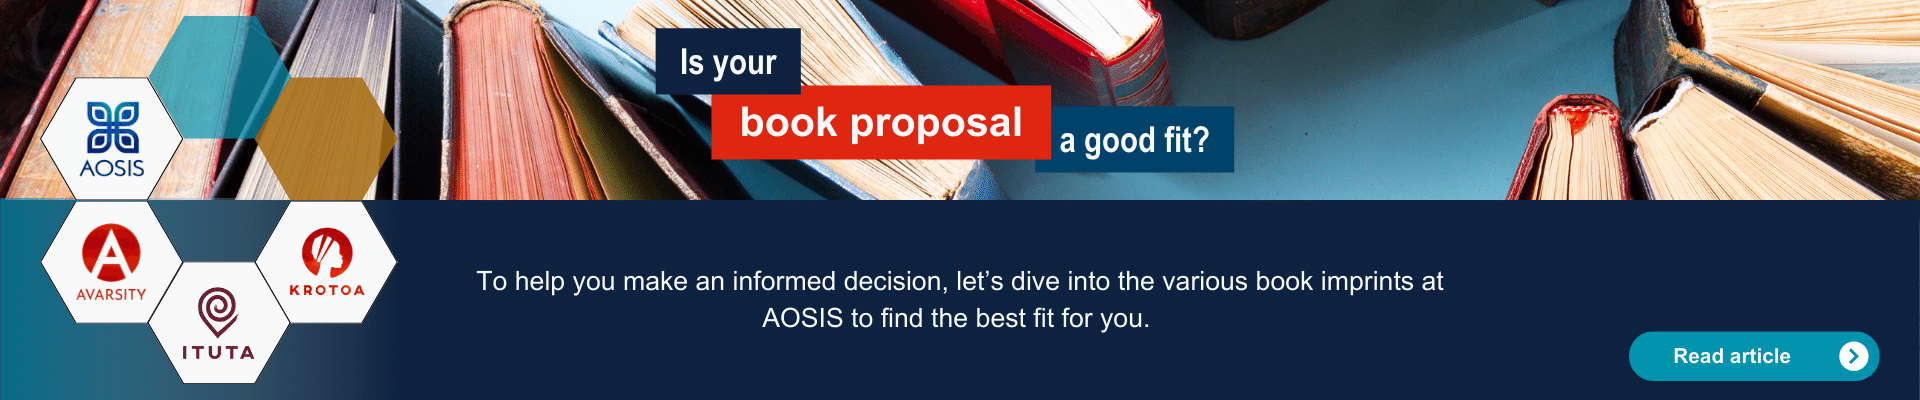 Discover the right fit for your book proposal